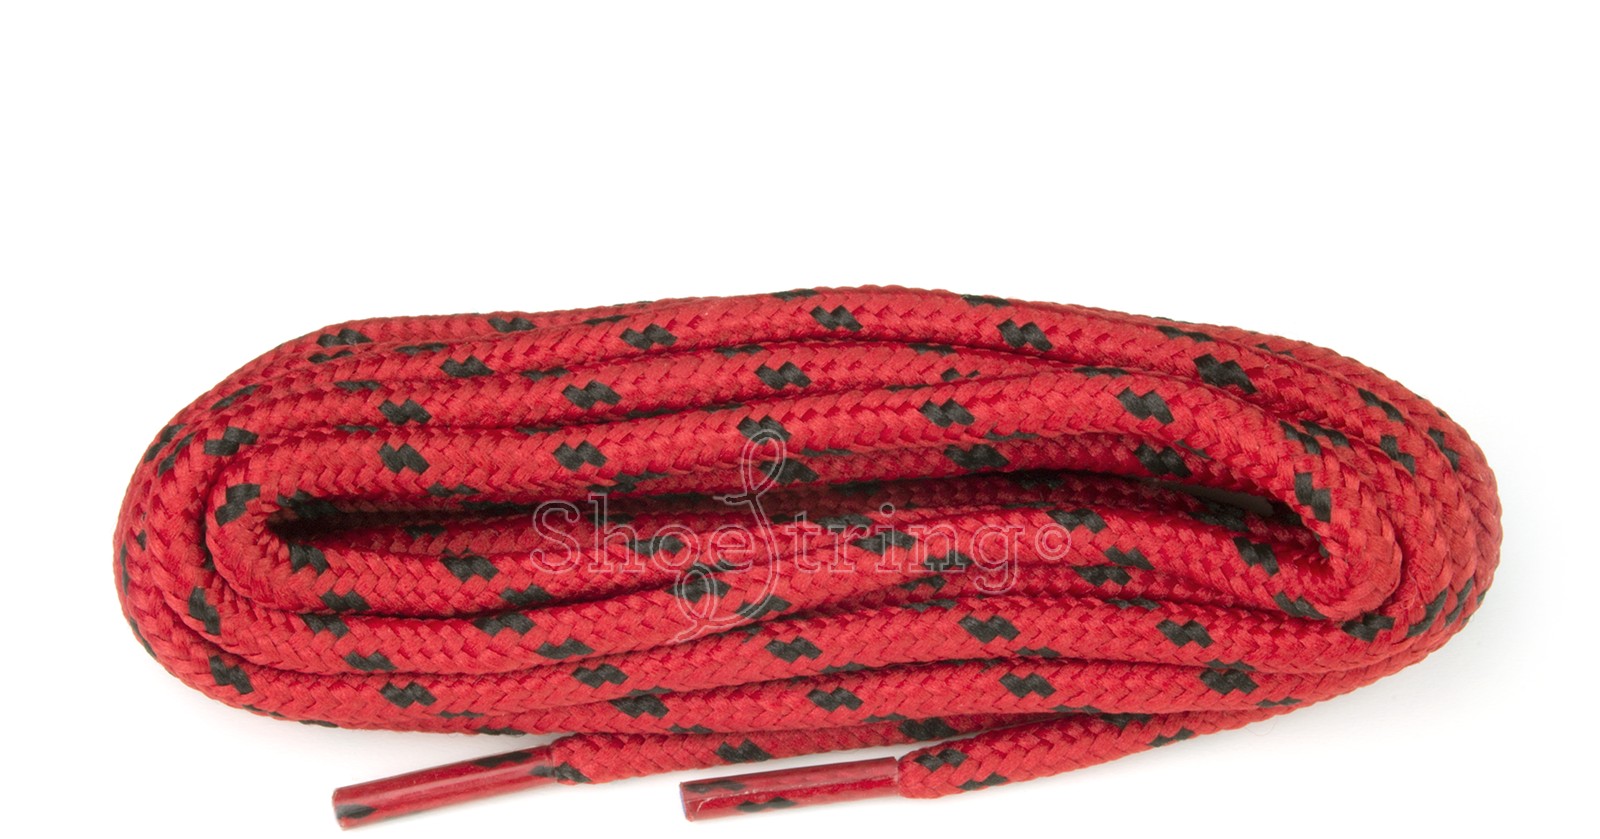 red and white striped shoelaces